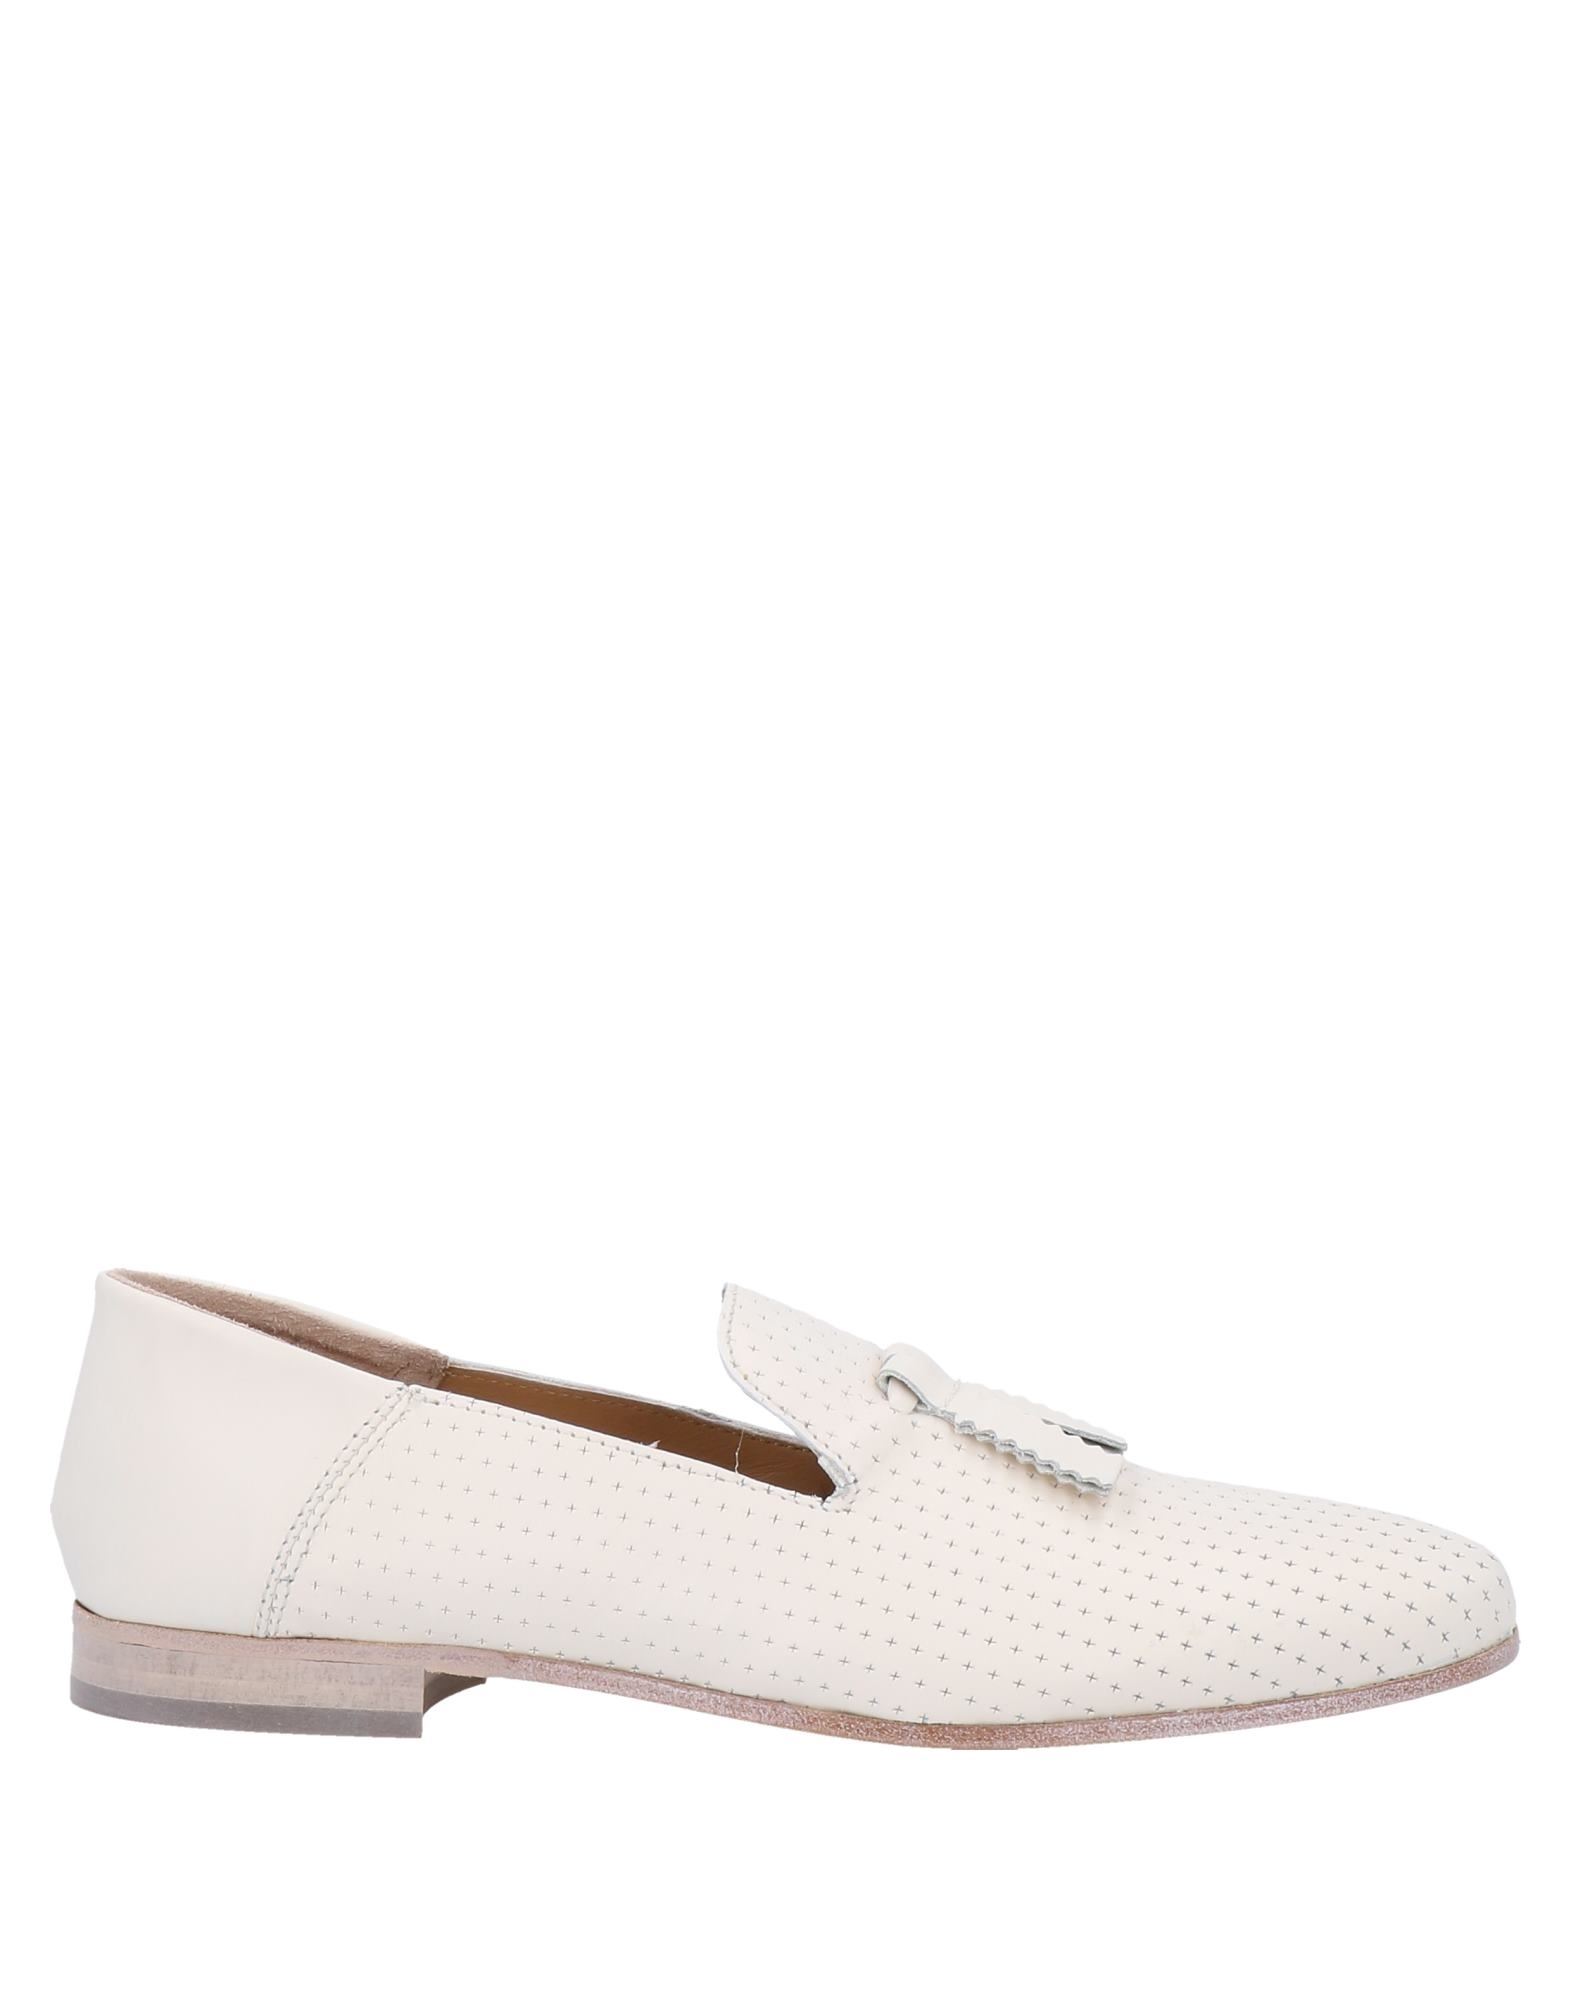 Boemos Loafers In Ivory